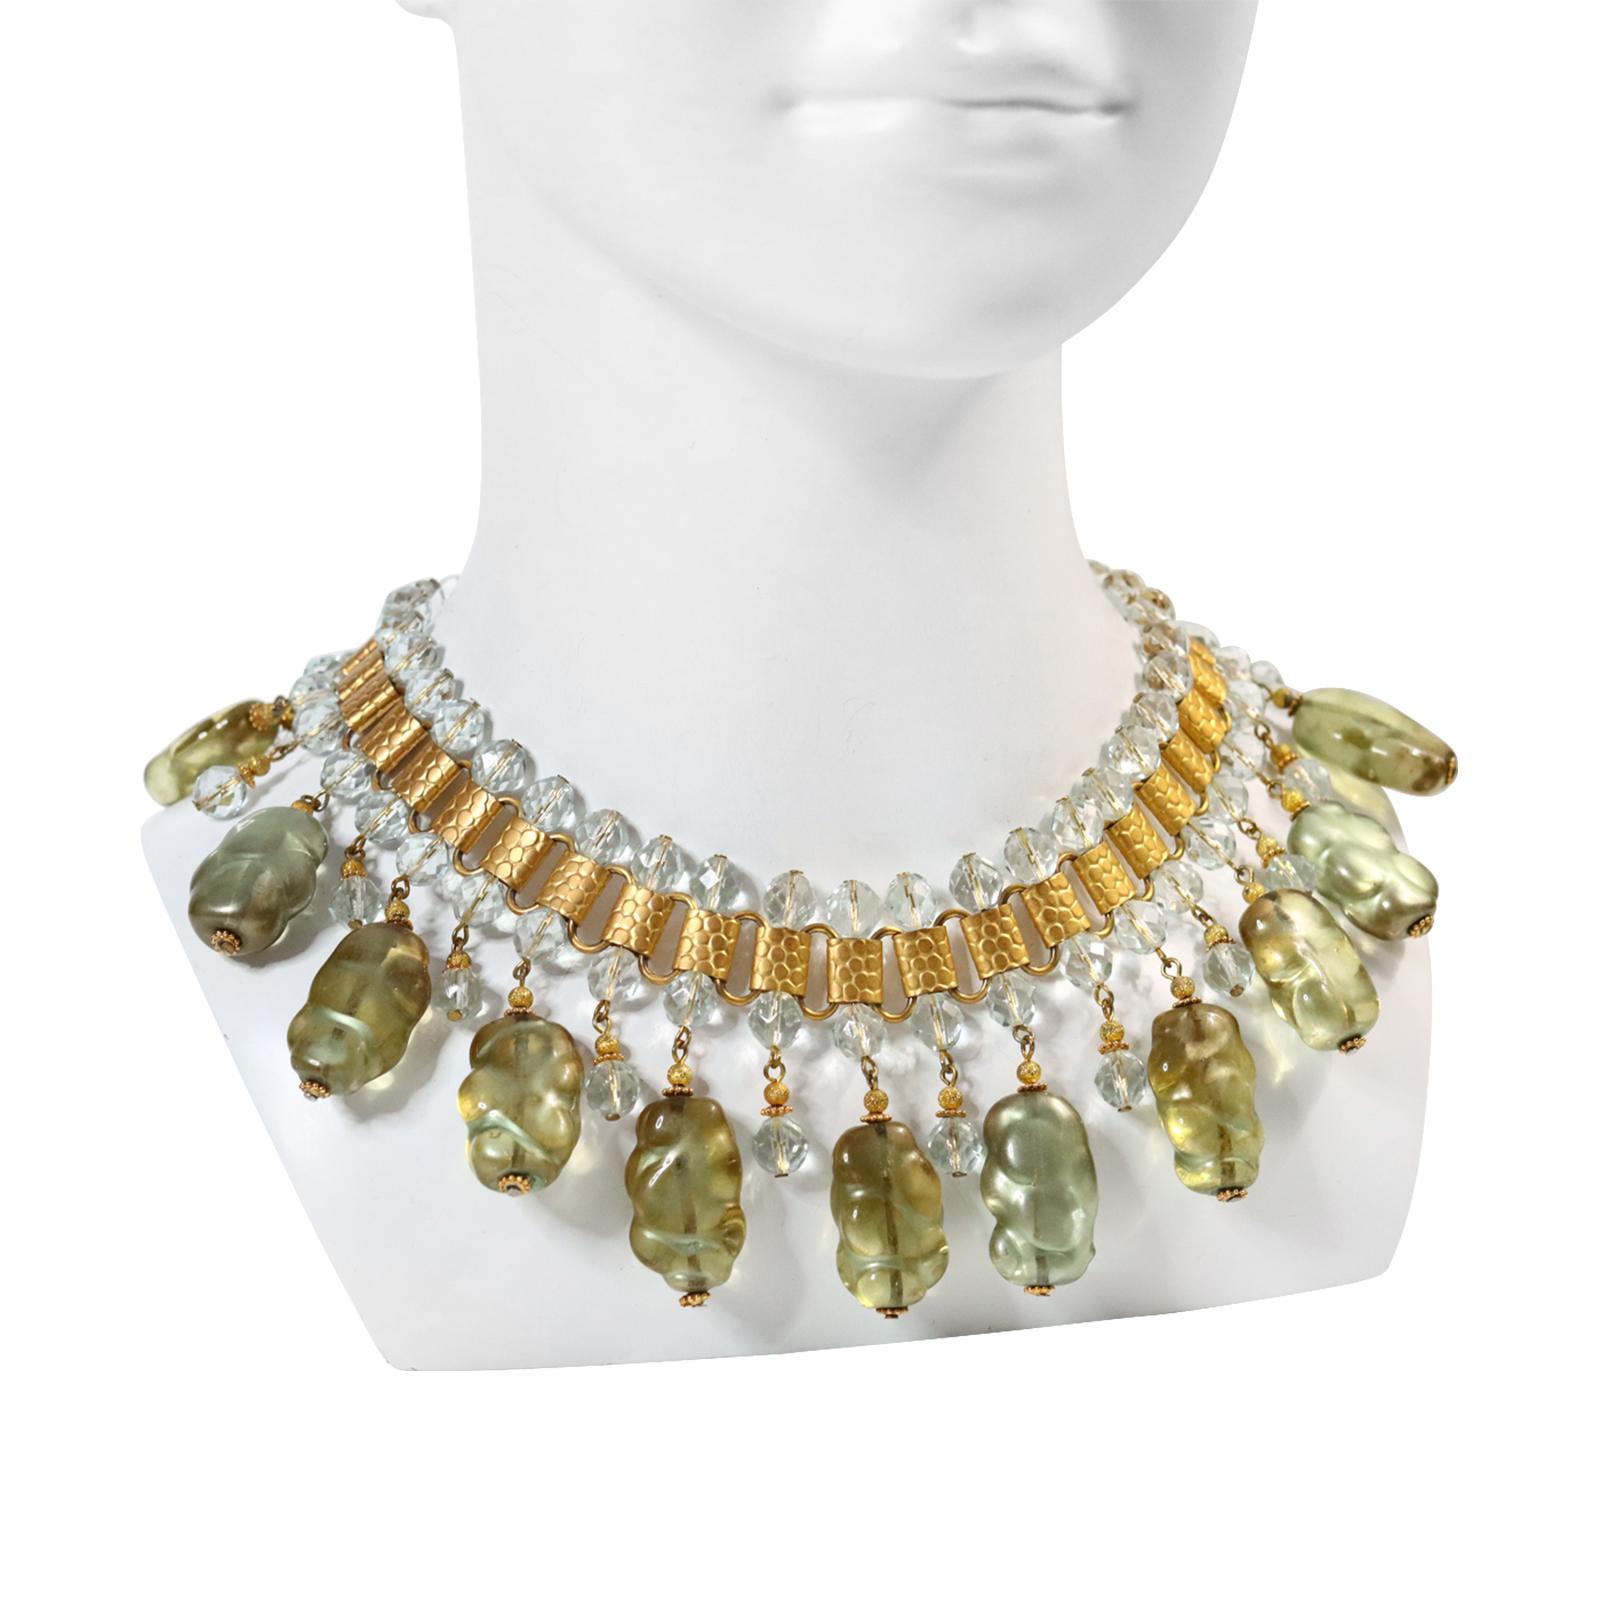 Vintage deLillo Gold Tone with Light Green Dangling Beads Necklace, circa 1970s For Sale 1